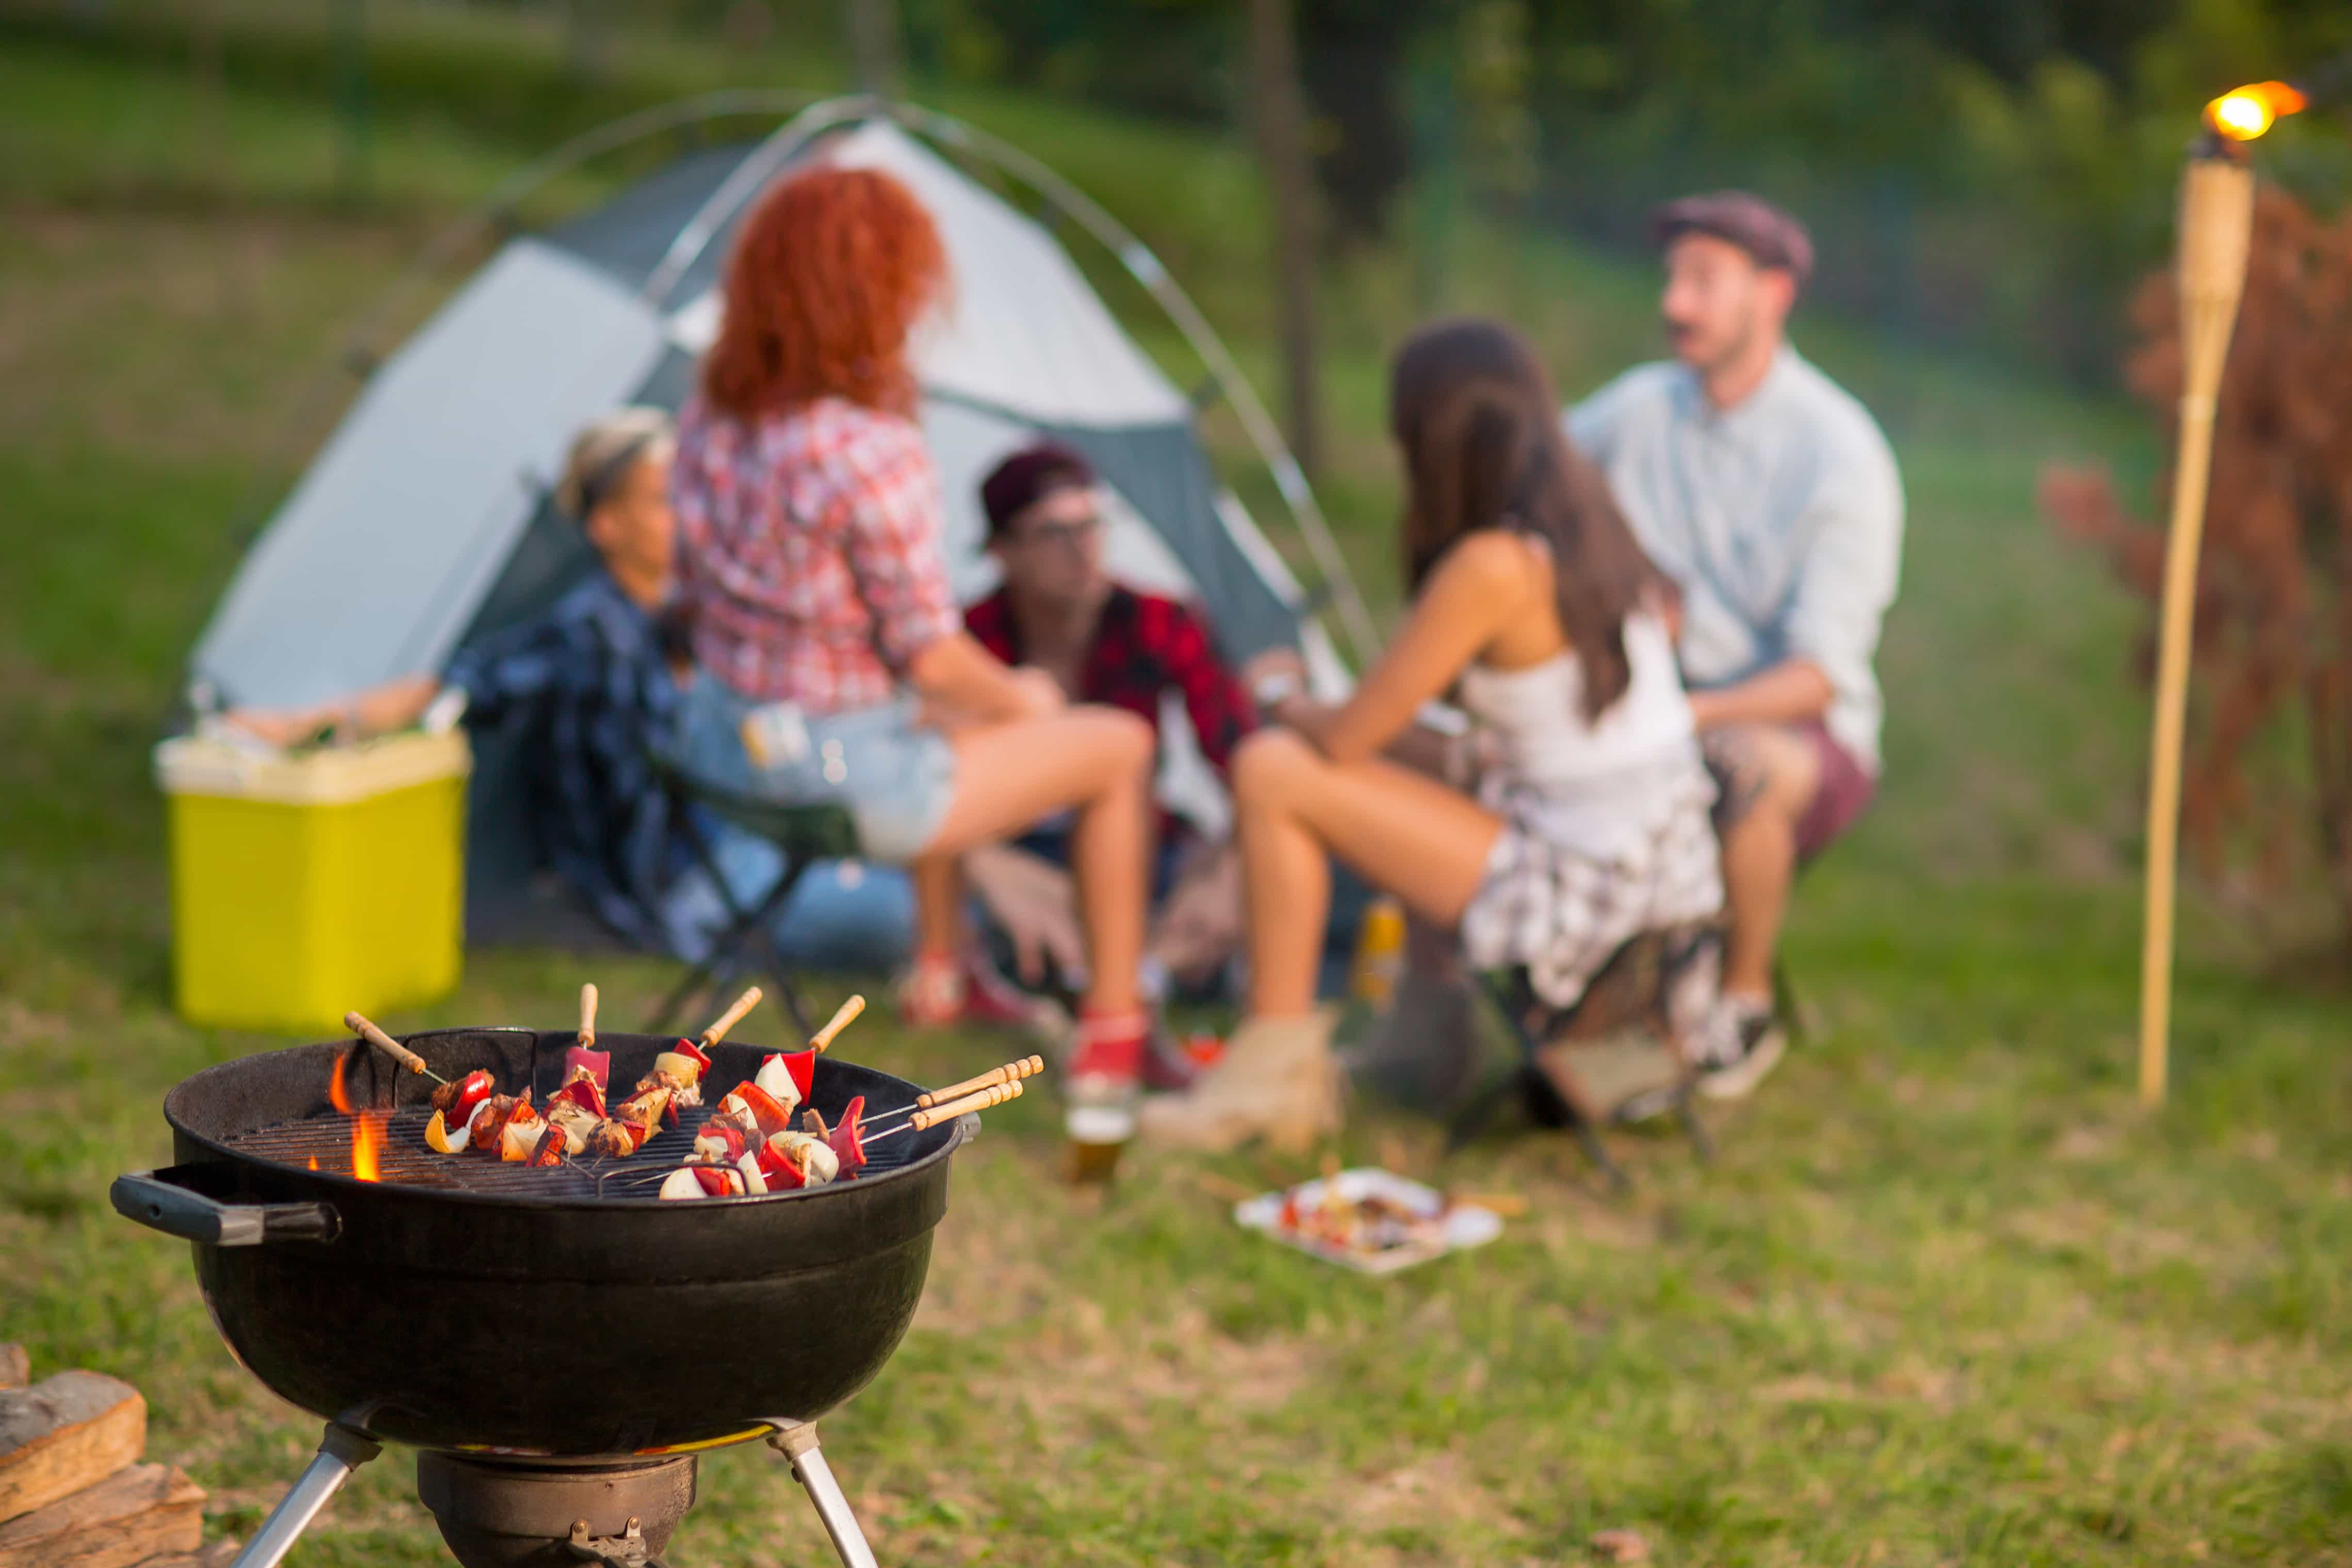 How To BBQ And Grill While Camping